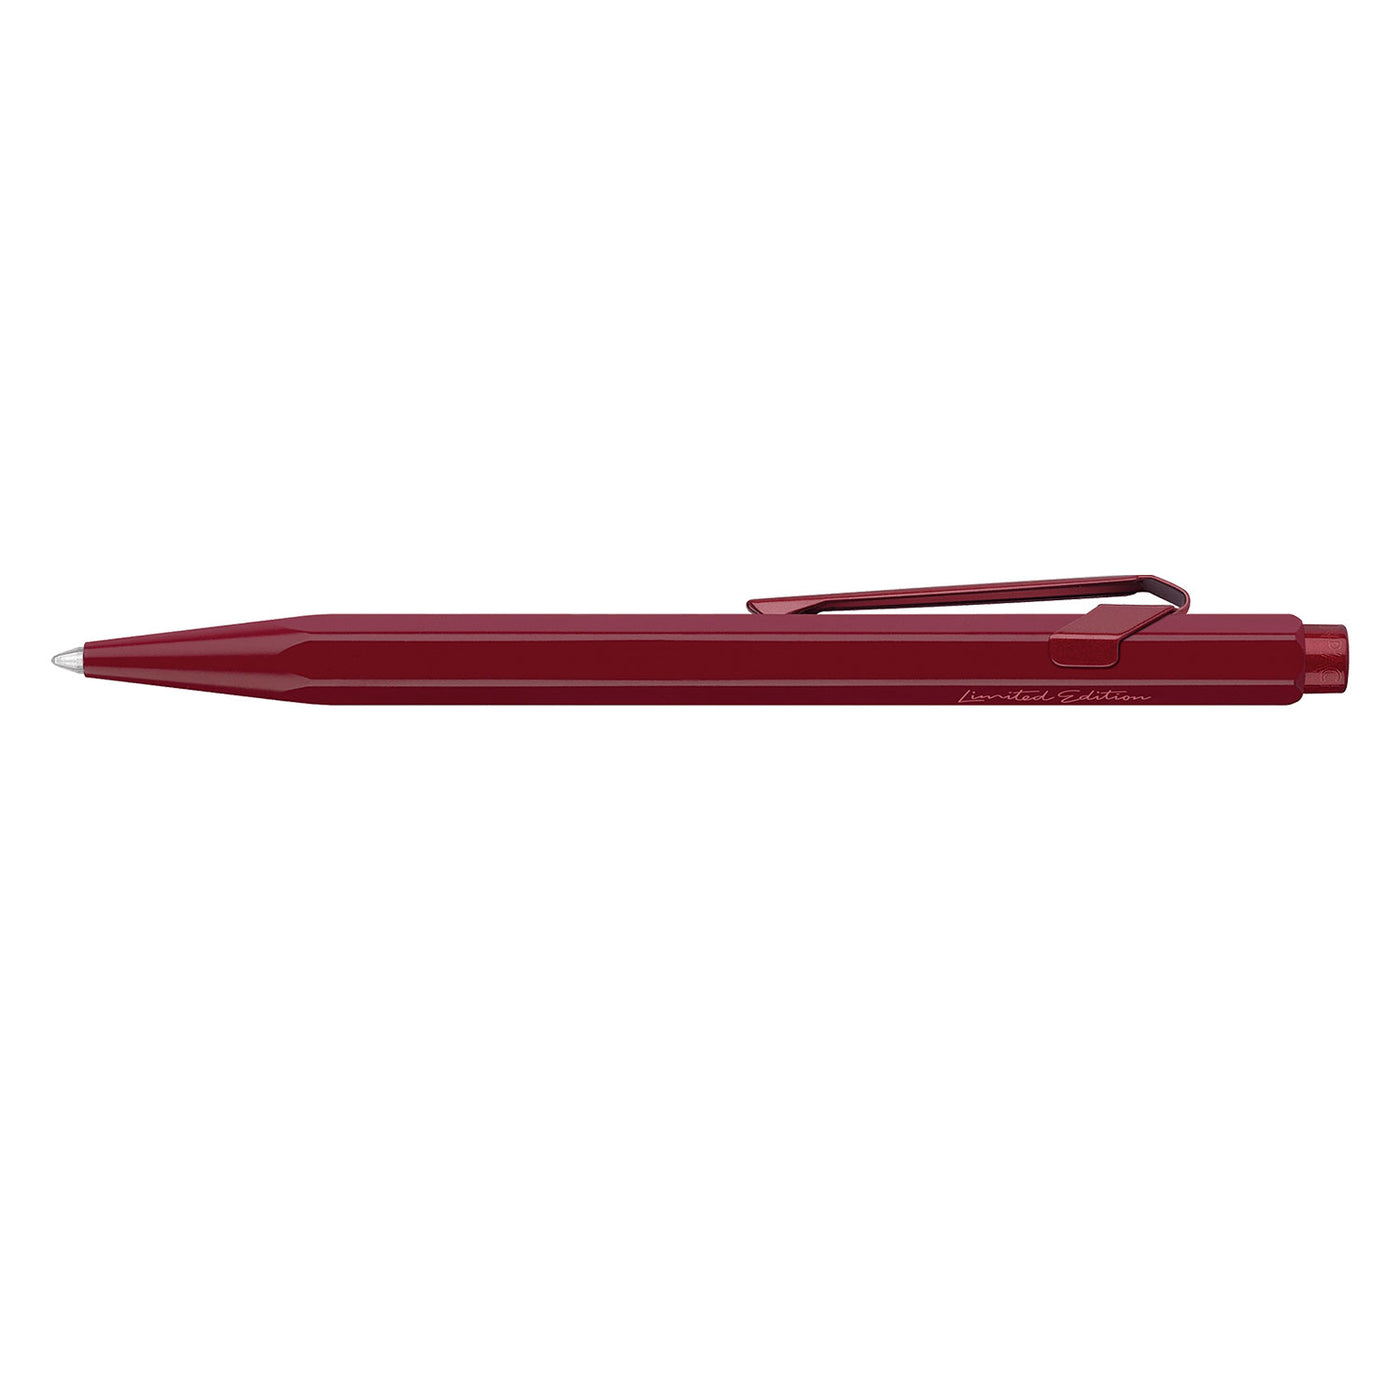 Caran d'Ache 849 Claim Your Style Ball Pen - Garnet Red (Limited Edition) 3